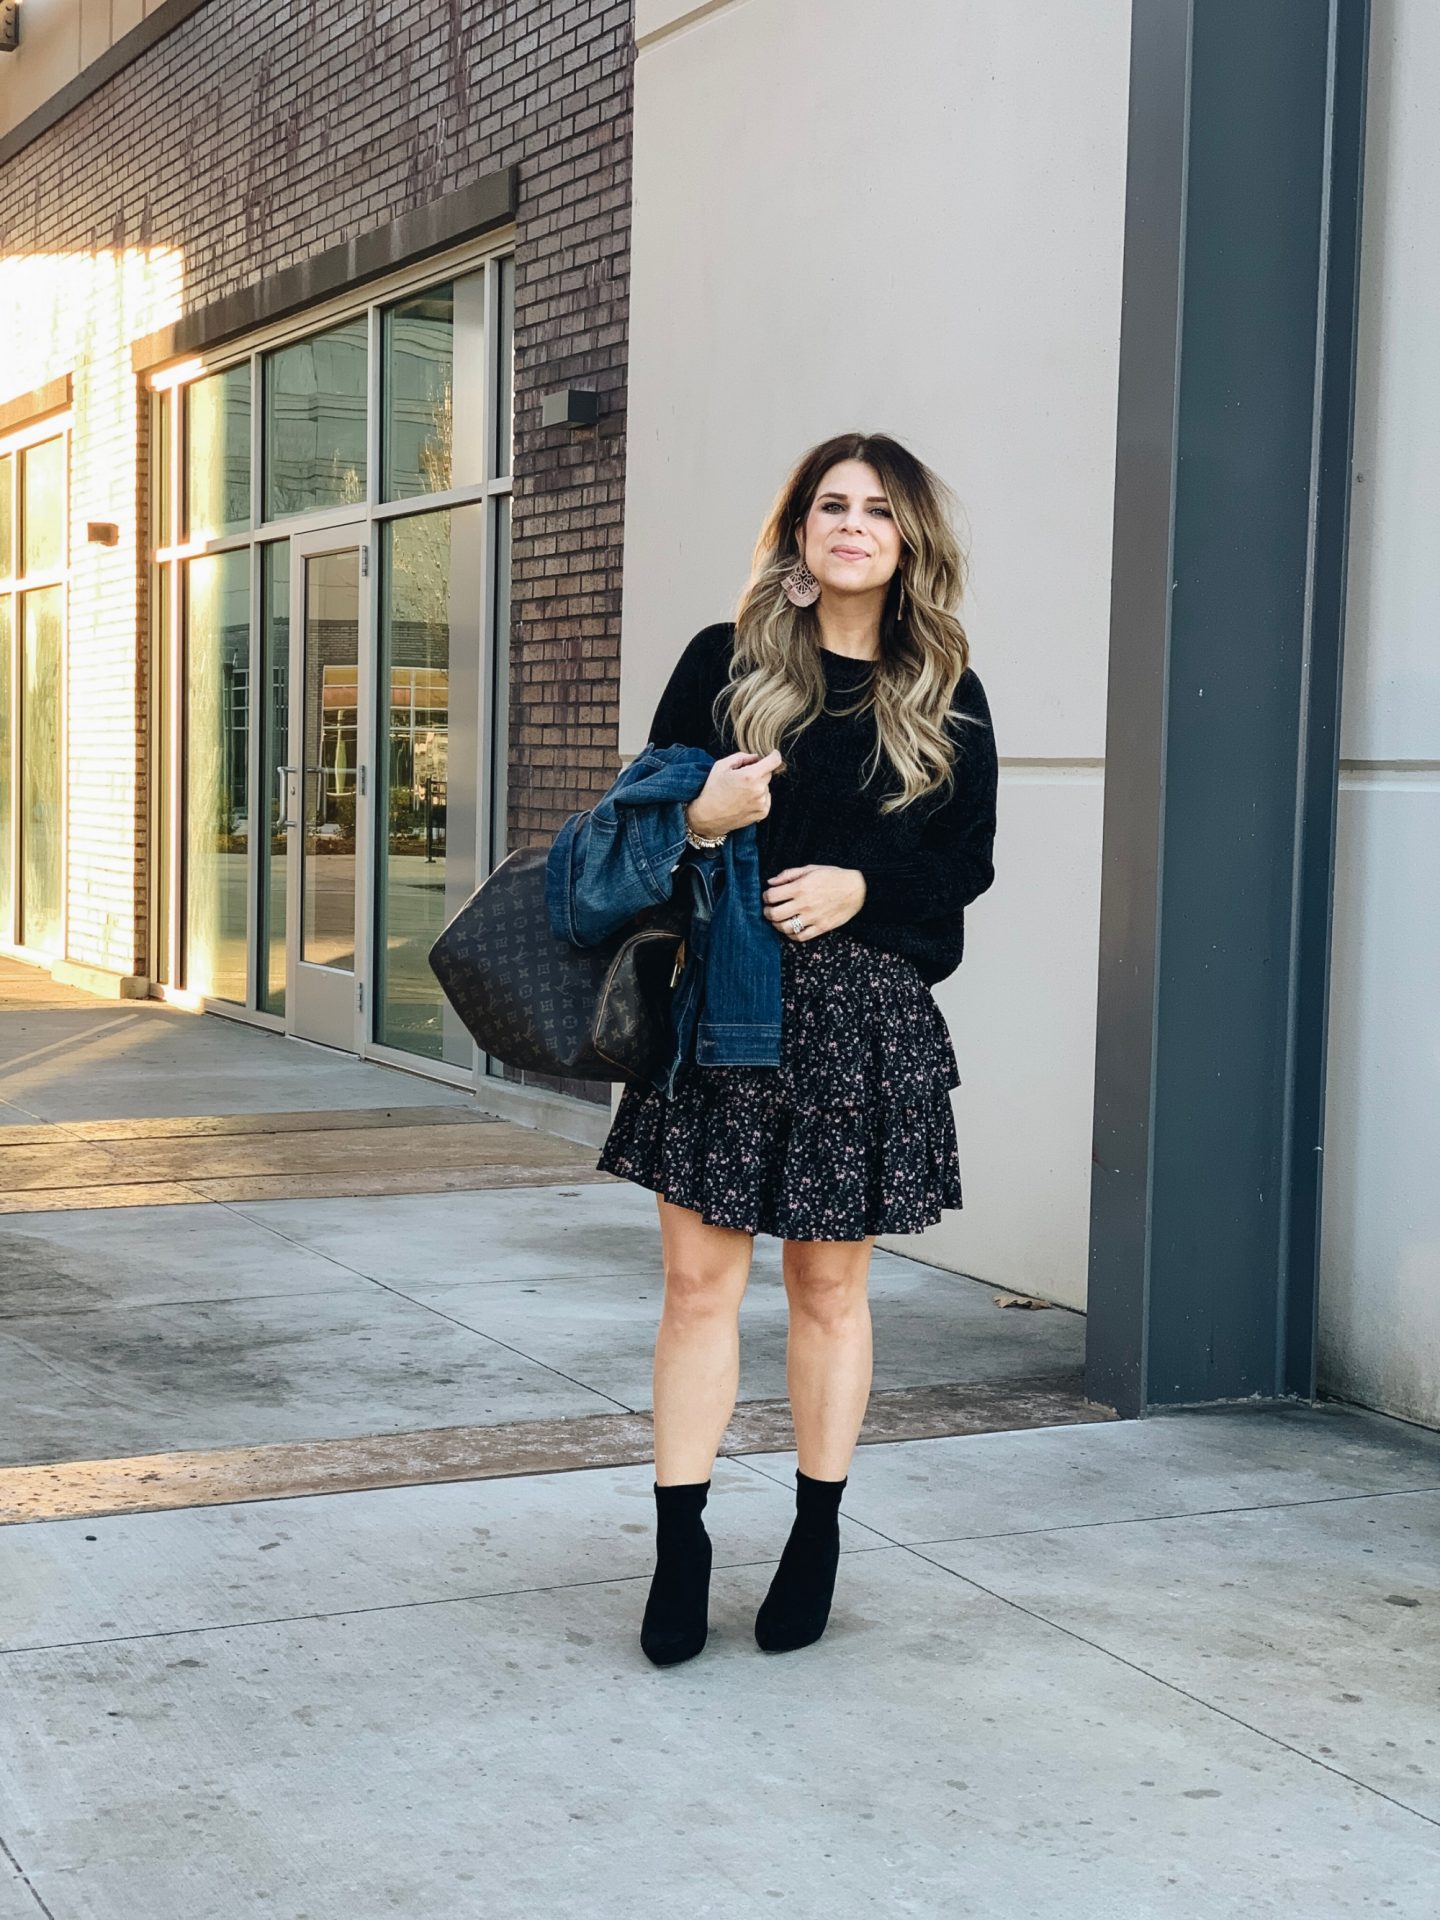 How To Style A Ruffle Skirt, How to Style Sock Booties, Speedy 35, Louis Vuitton, How to Style a Denim Jacket, Date Night Style, Statement Earrings, Stella & Dot 